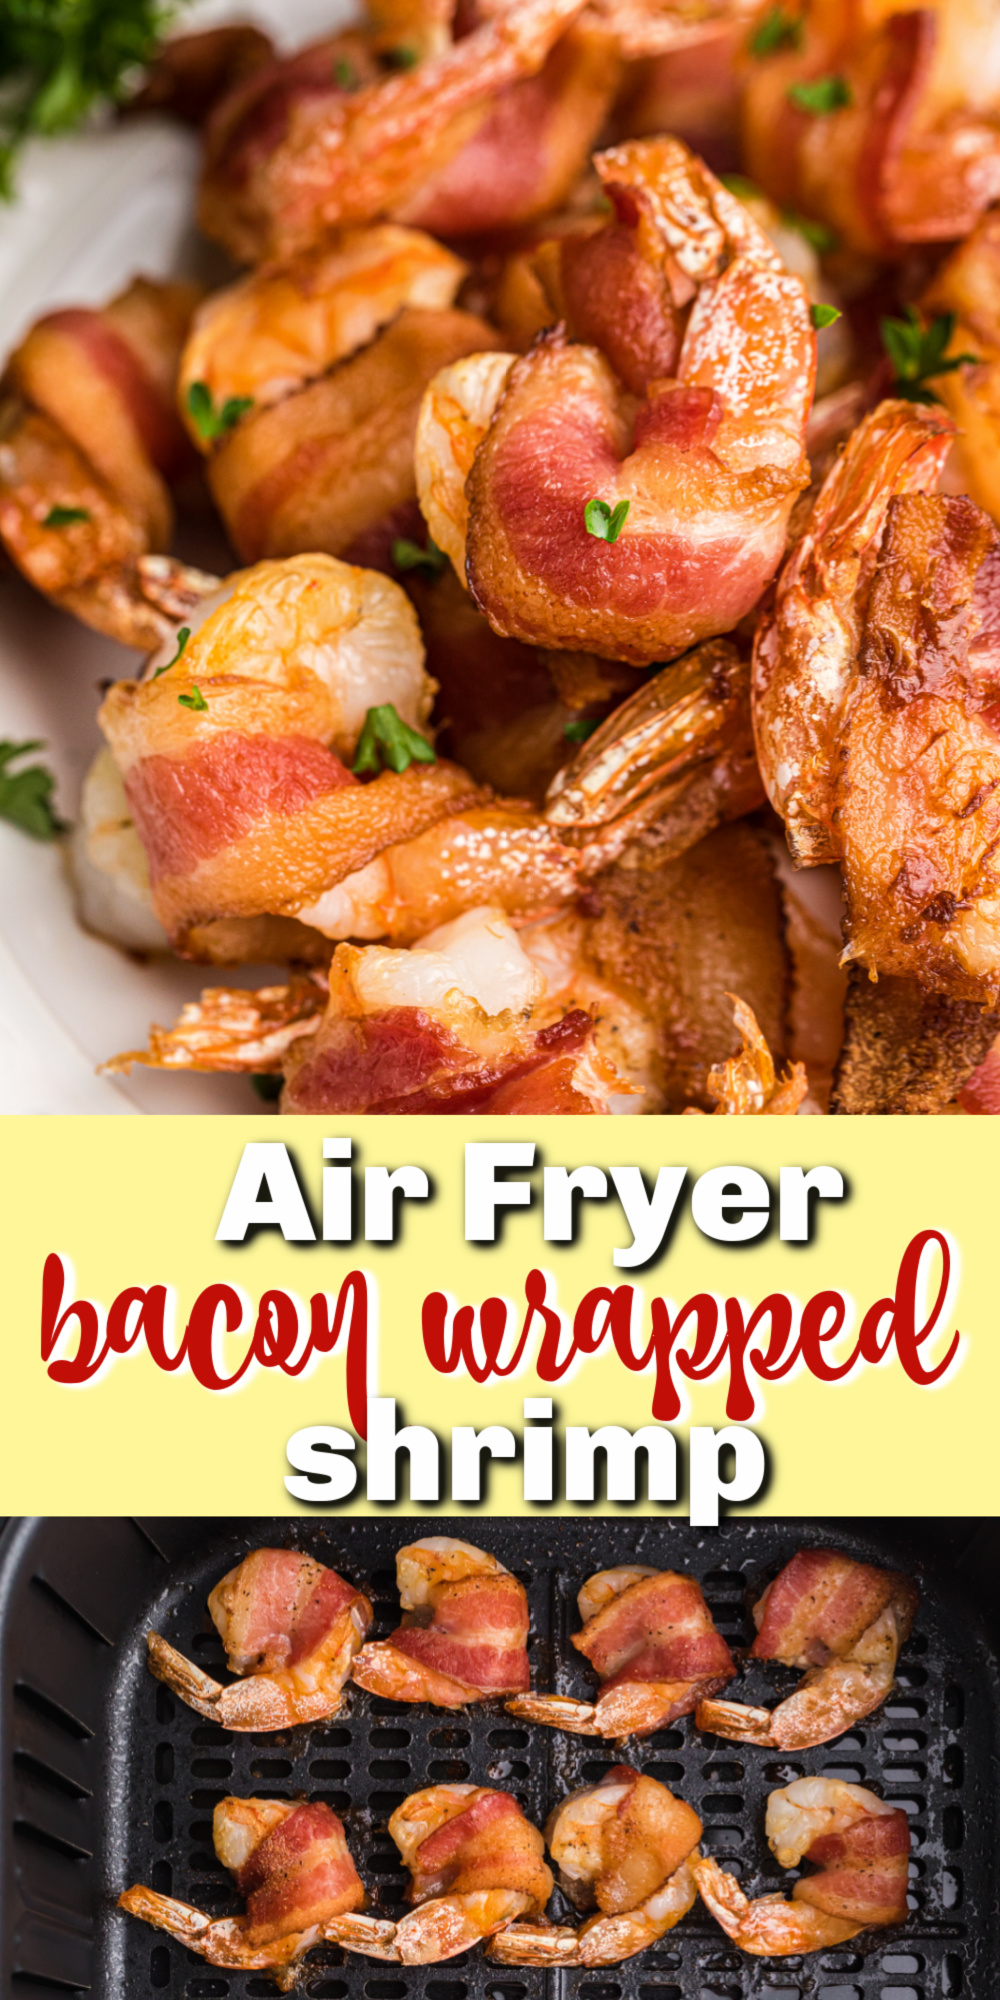 Looking for an easy way to combine the flavors of bacon and shrimp? This Air Fryer Bacon Wrapped Shrimp is the best! Just three easy ingredients are all you need! It's the perfect easy air fryer appetizer or snack.